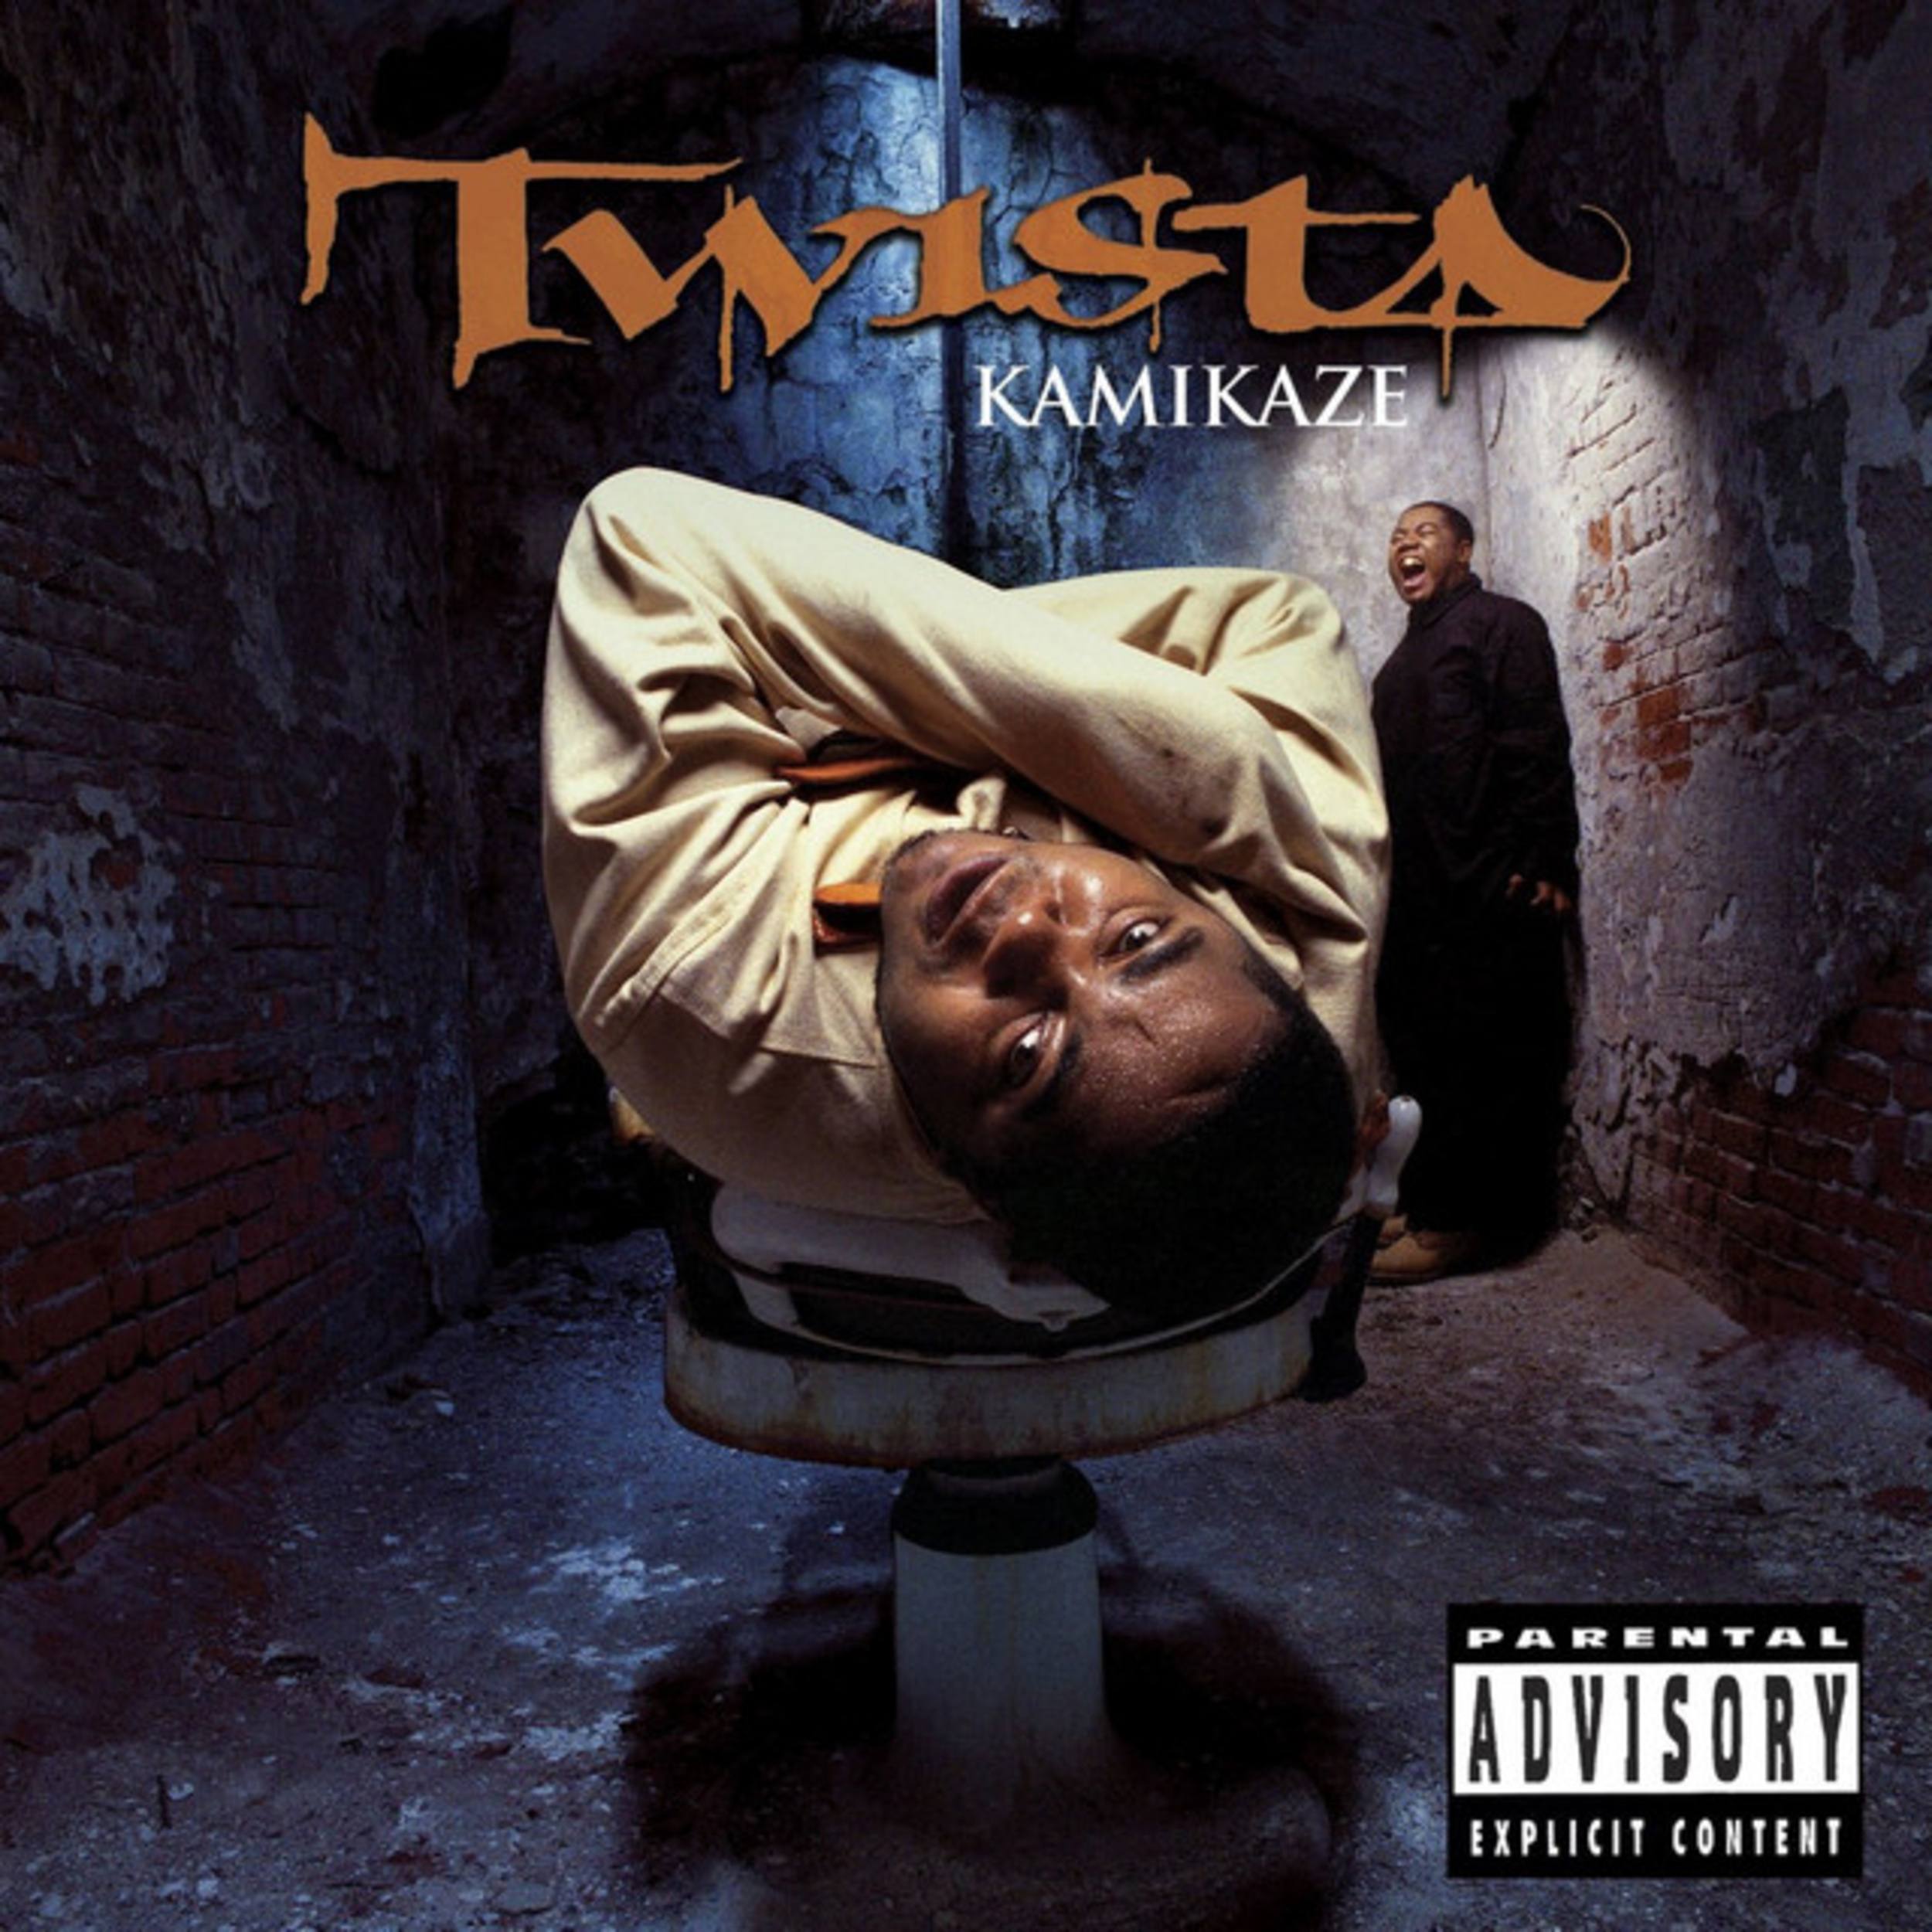 <p>Twista released his most successful album to date with his 2004 project <em>Kamikaze.</em> The rapper teamed up with Kanye West on production for two of his singles, <a href="https://www.youtube.com/watch?v=-QSgUfphaTI">"Slow Jamz"</a> and "Overnight Celebrity." In proper West form, the production included samples from songs like Dionne Warwick's "A House Is Not A Home" and Lenny Williams' "Cause I Love You."  </p><p>You may also like: <a href='https://www.yardbarker.com/entertainment/articles/the_20_funniest_animated_movies_022024/s1__39545534'>The 20 funniest animated movies</a></p>